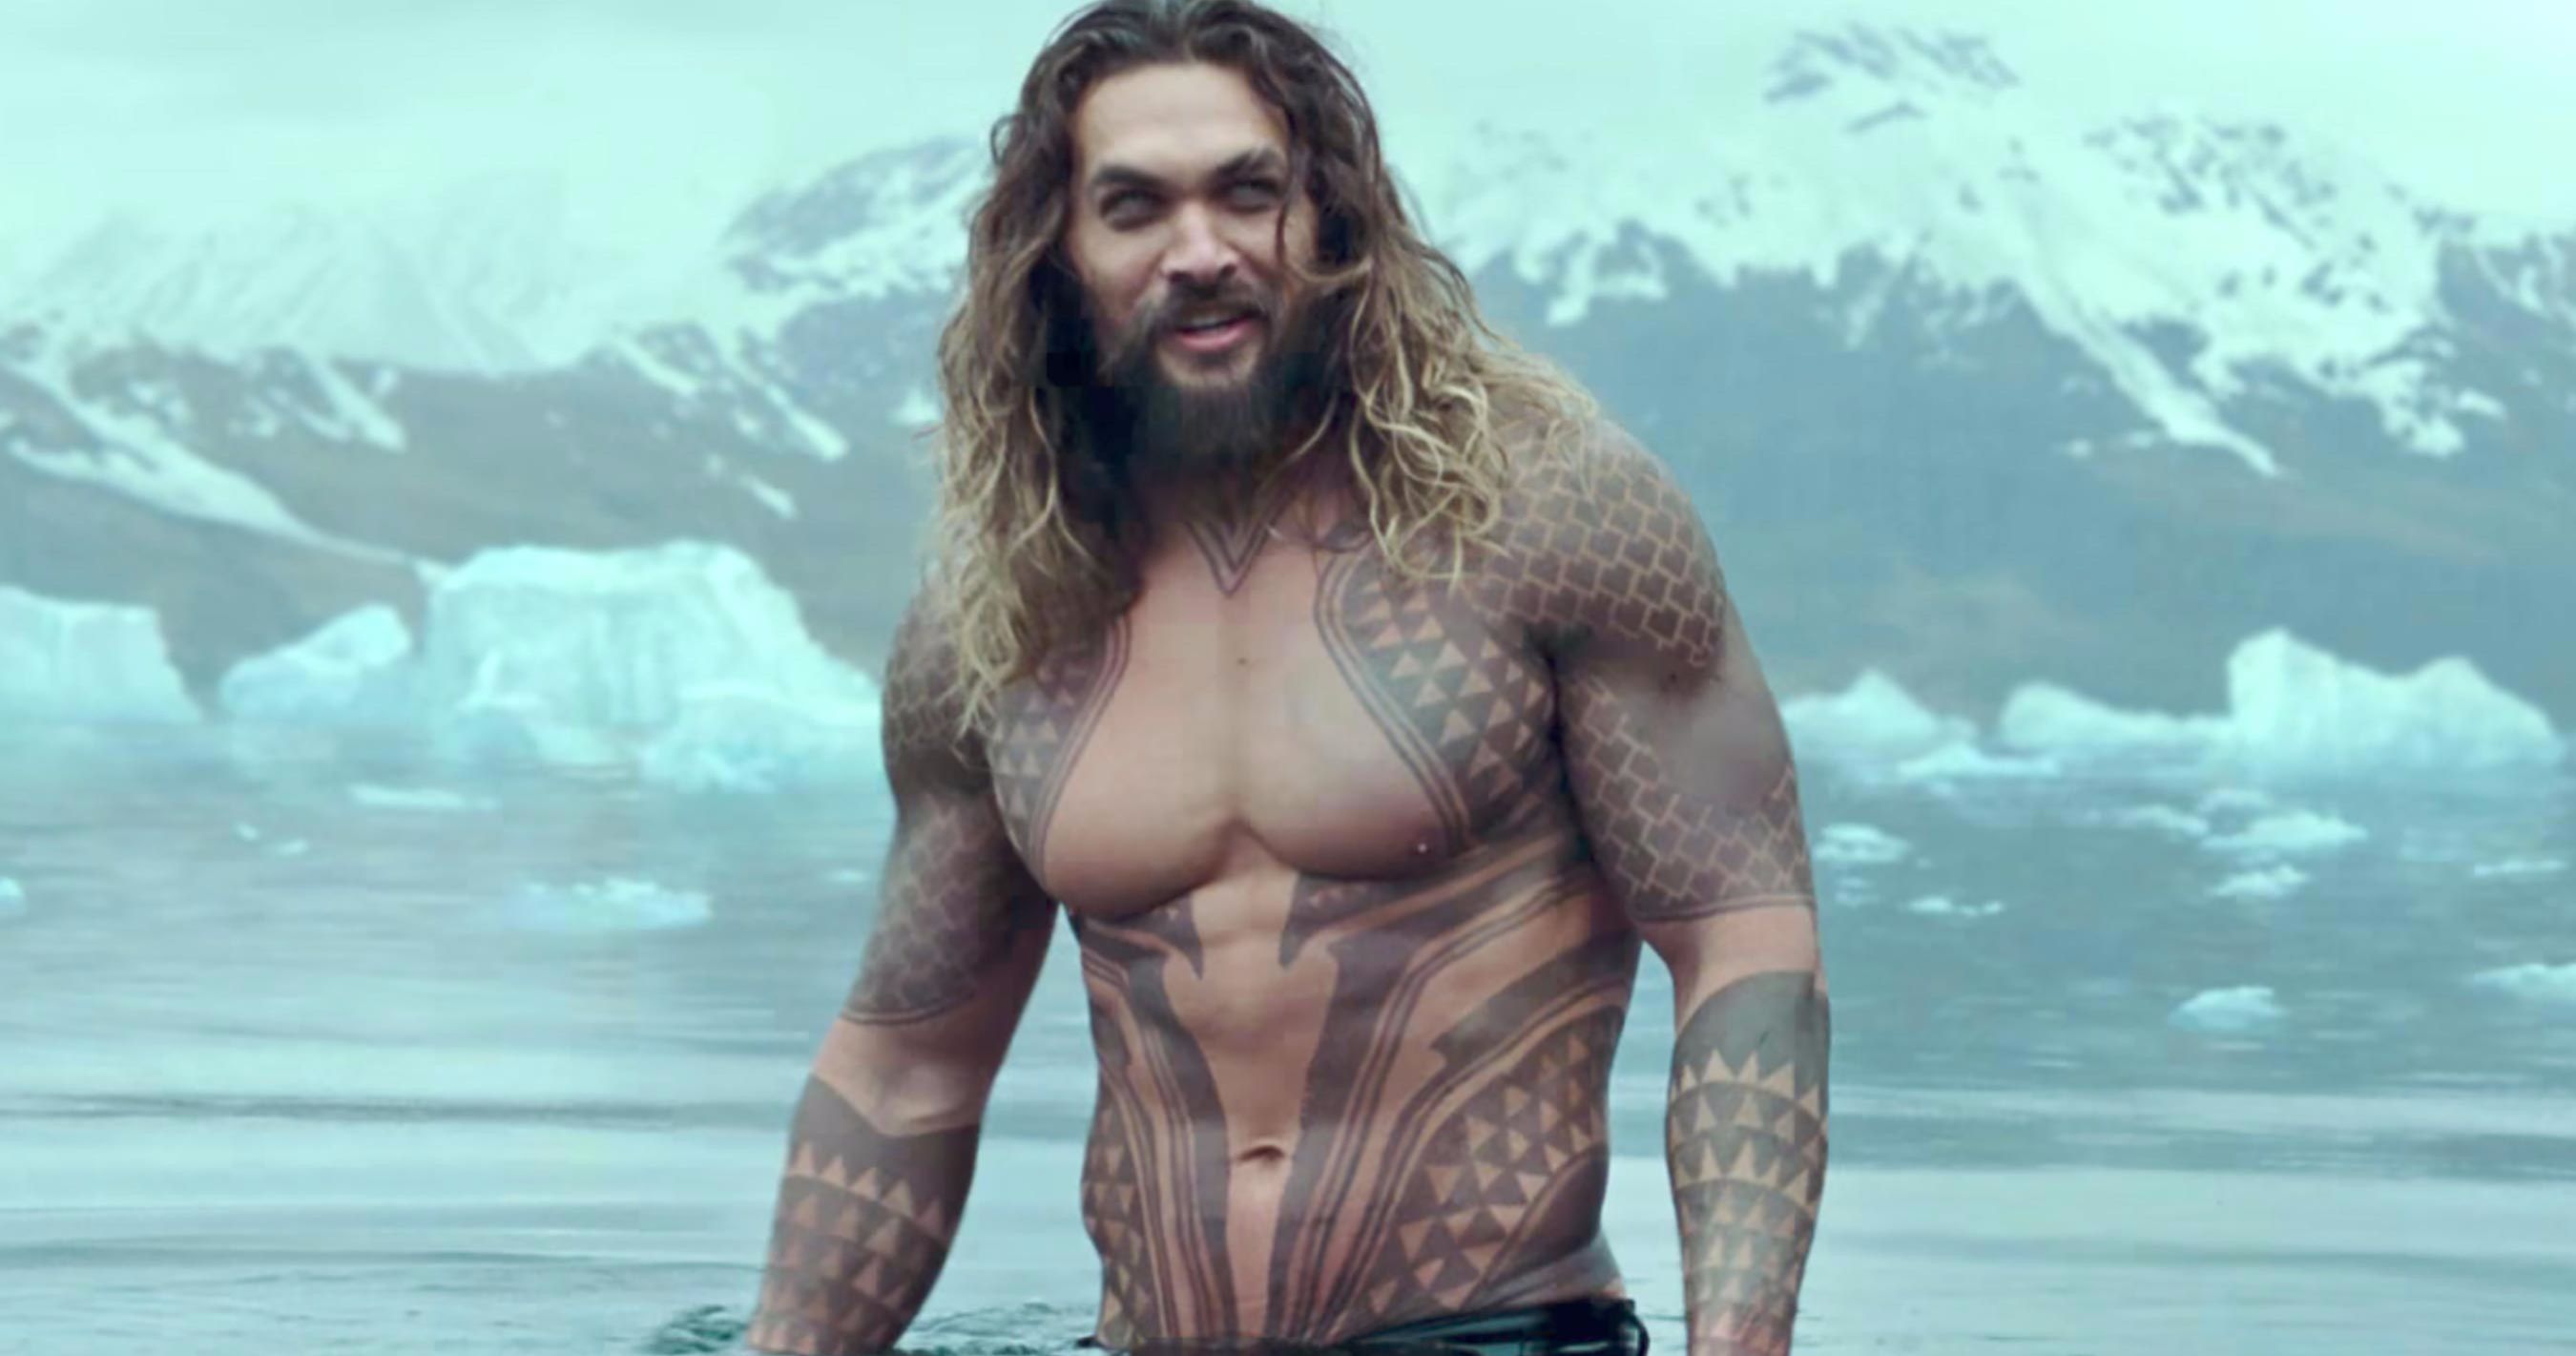 Jason Momoa Ridiculously Shamed on Social Media for Not Being in Aquaman Shape